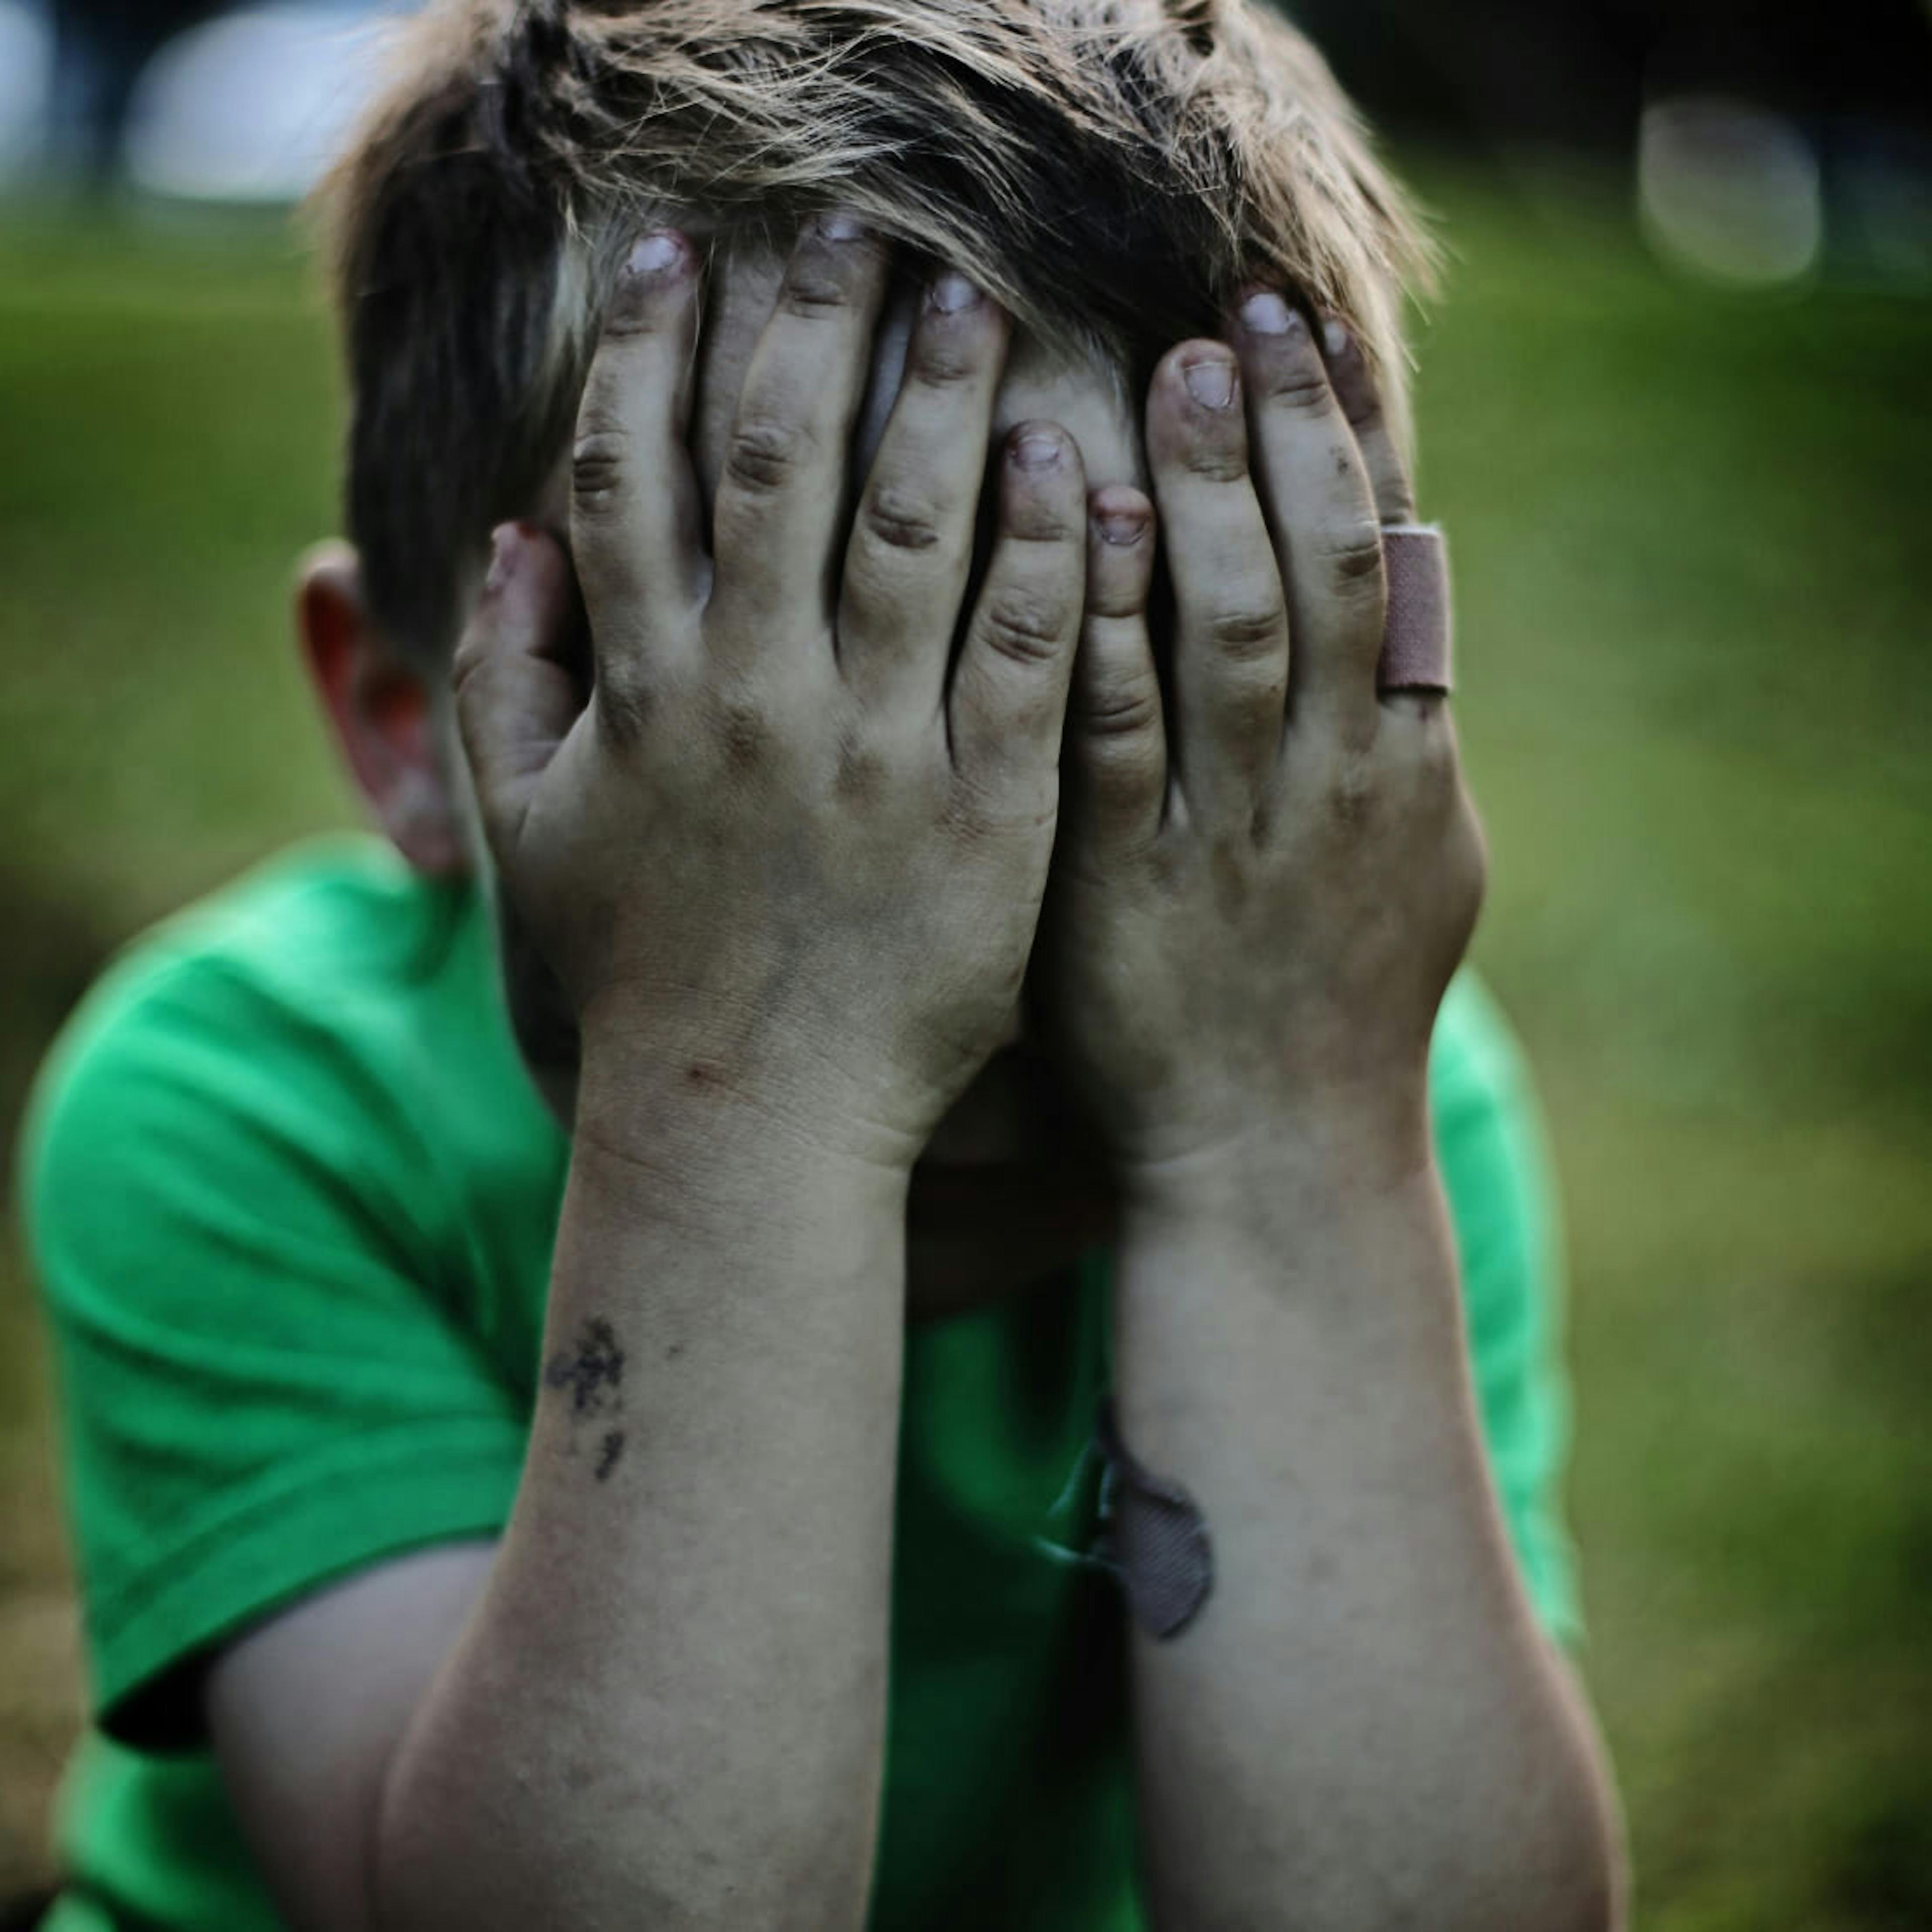 An abused child tries to forget his trauma.